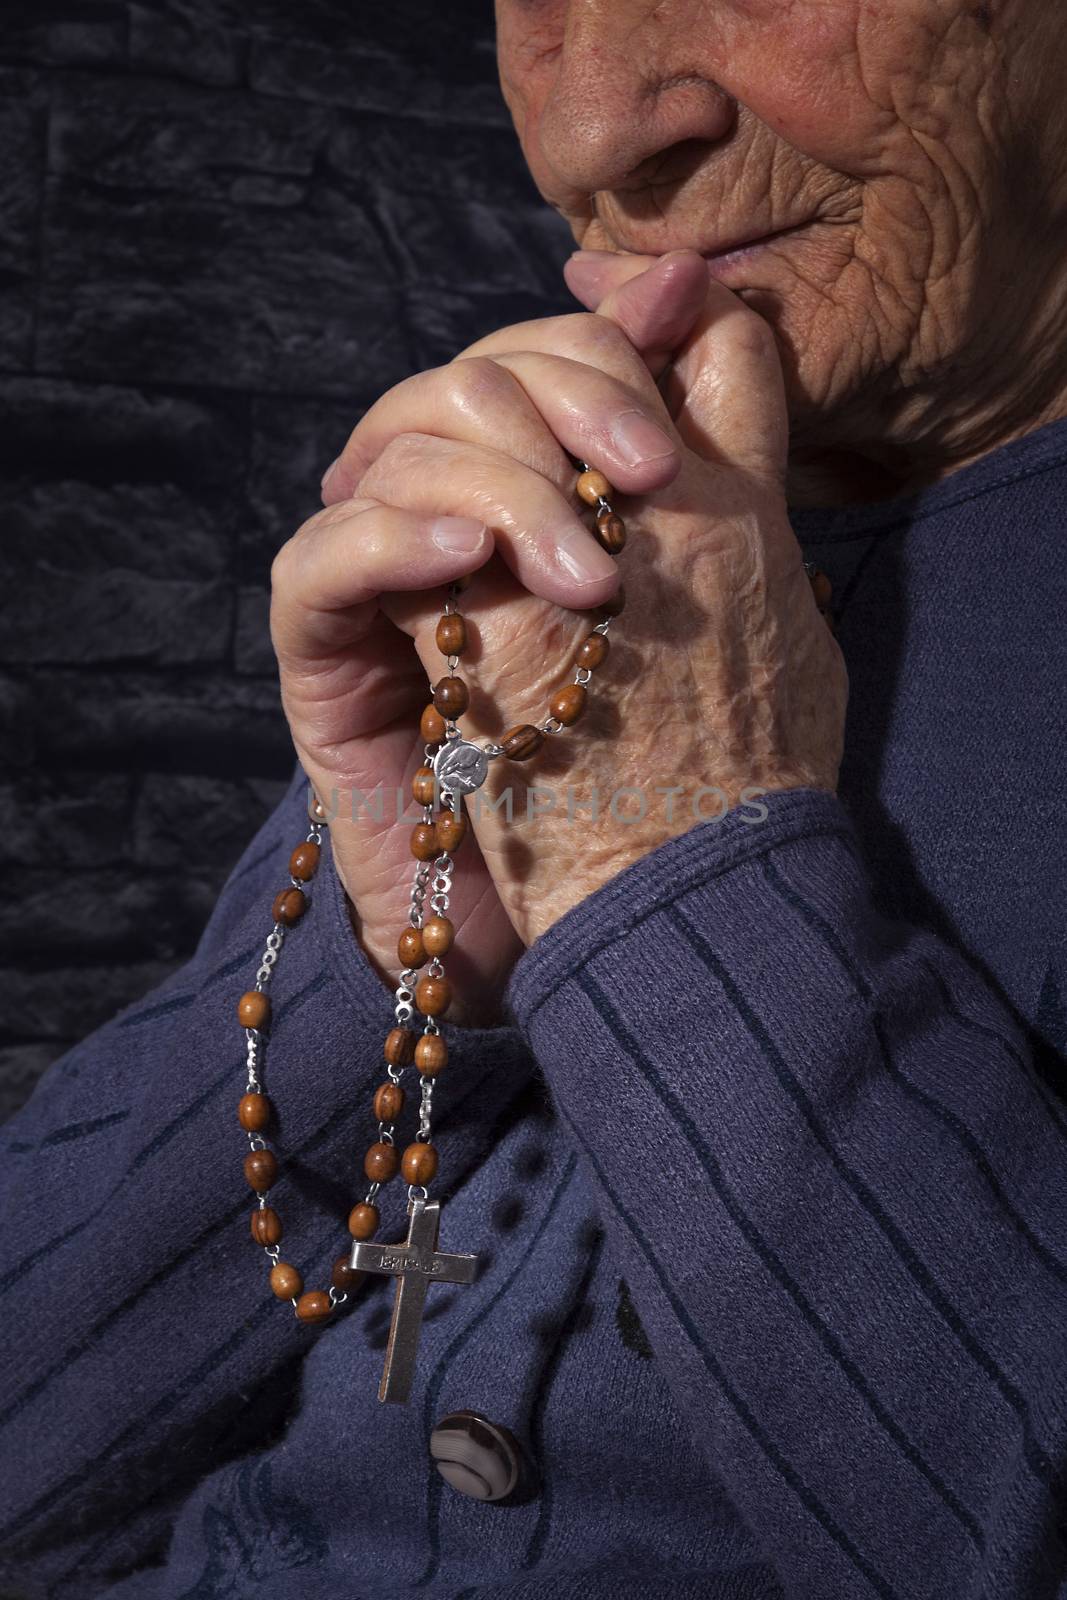 Grandmother praying. Old wrinkled beautiful woman praying with rosary. Faith, spiritualy and religion.